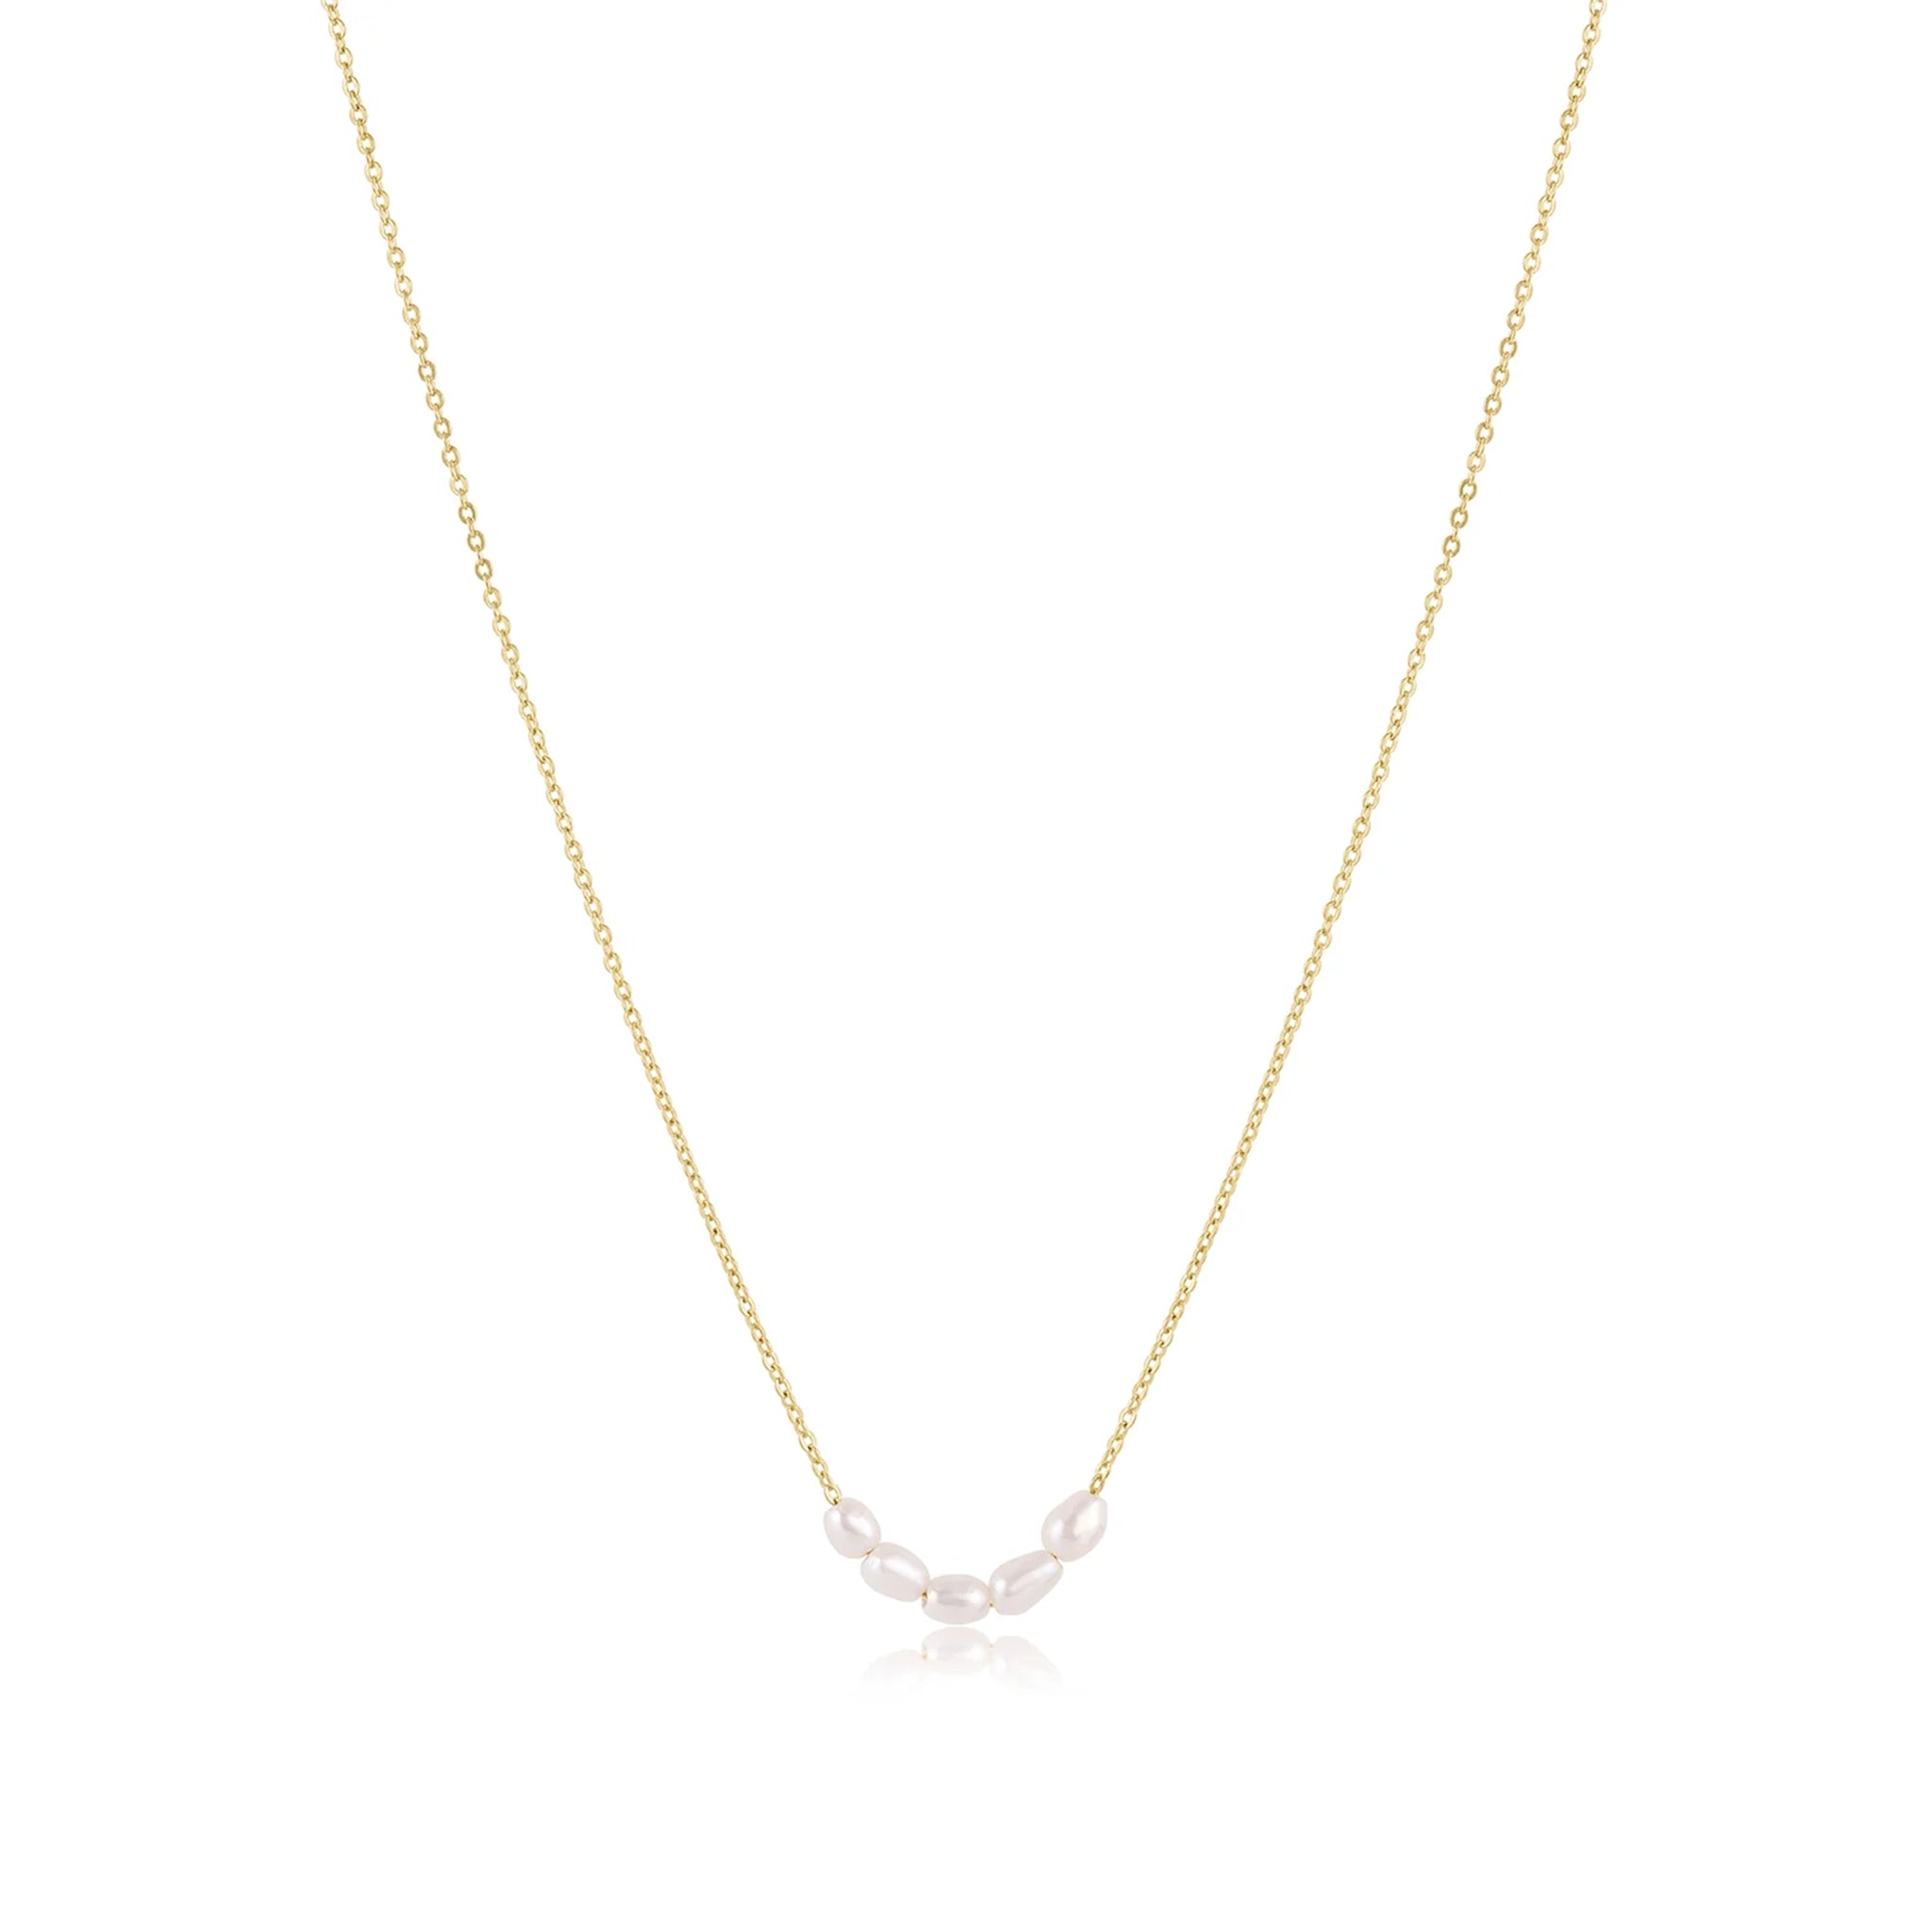 The dainty gold chain necklace with five small pearls lined next to each other.